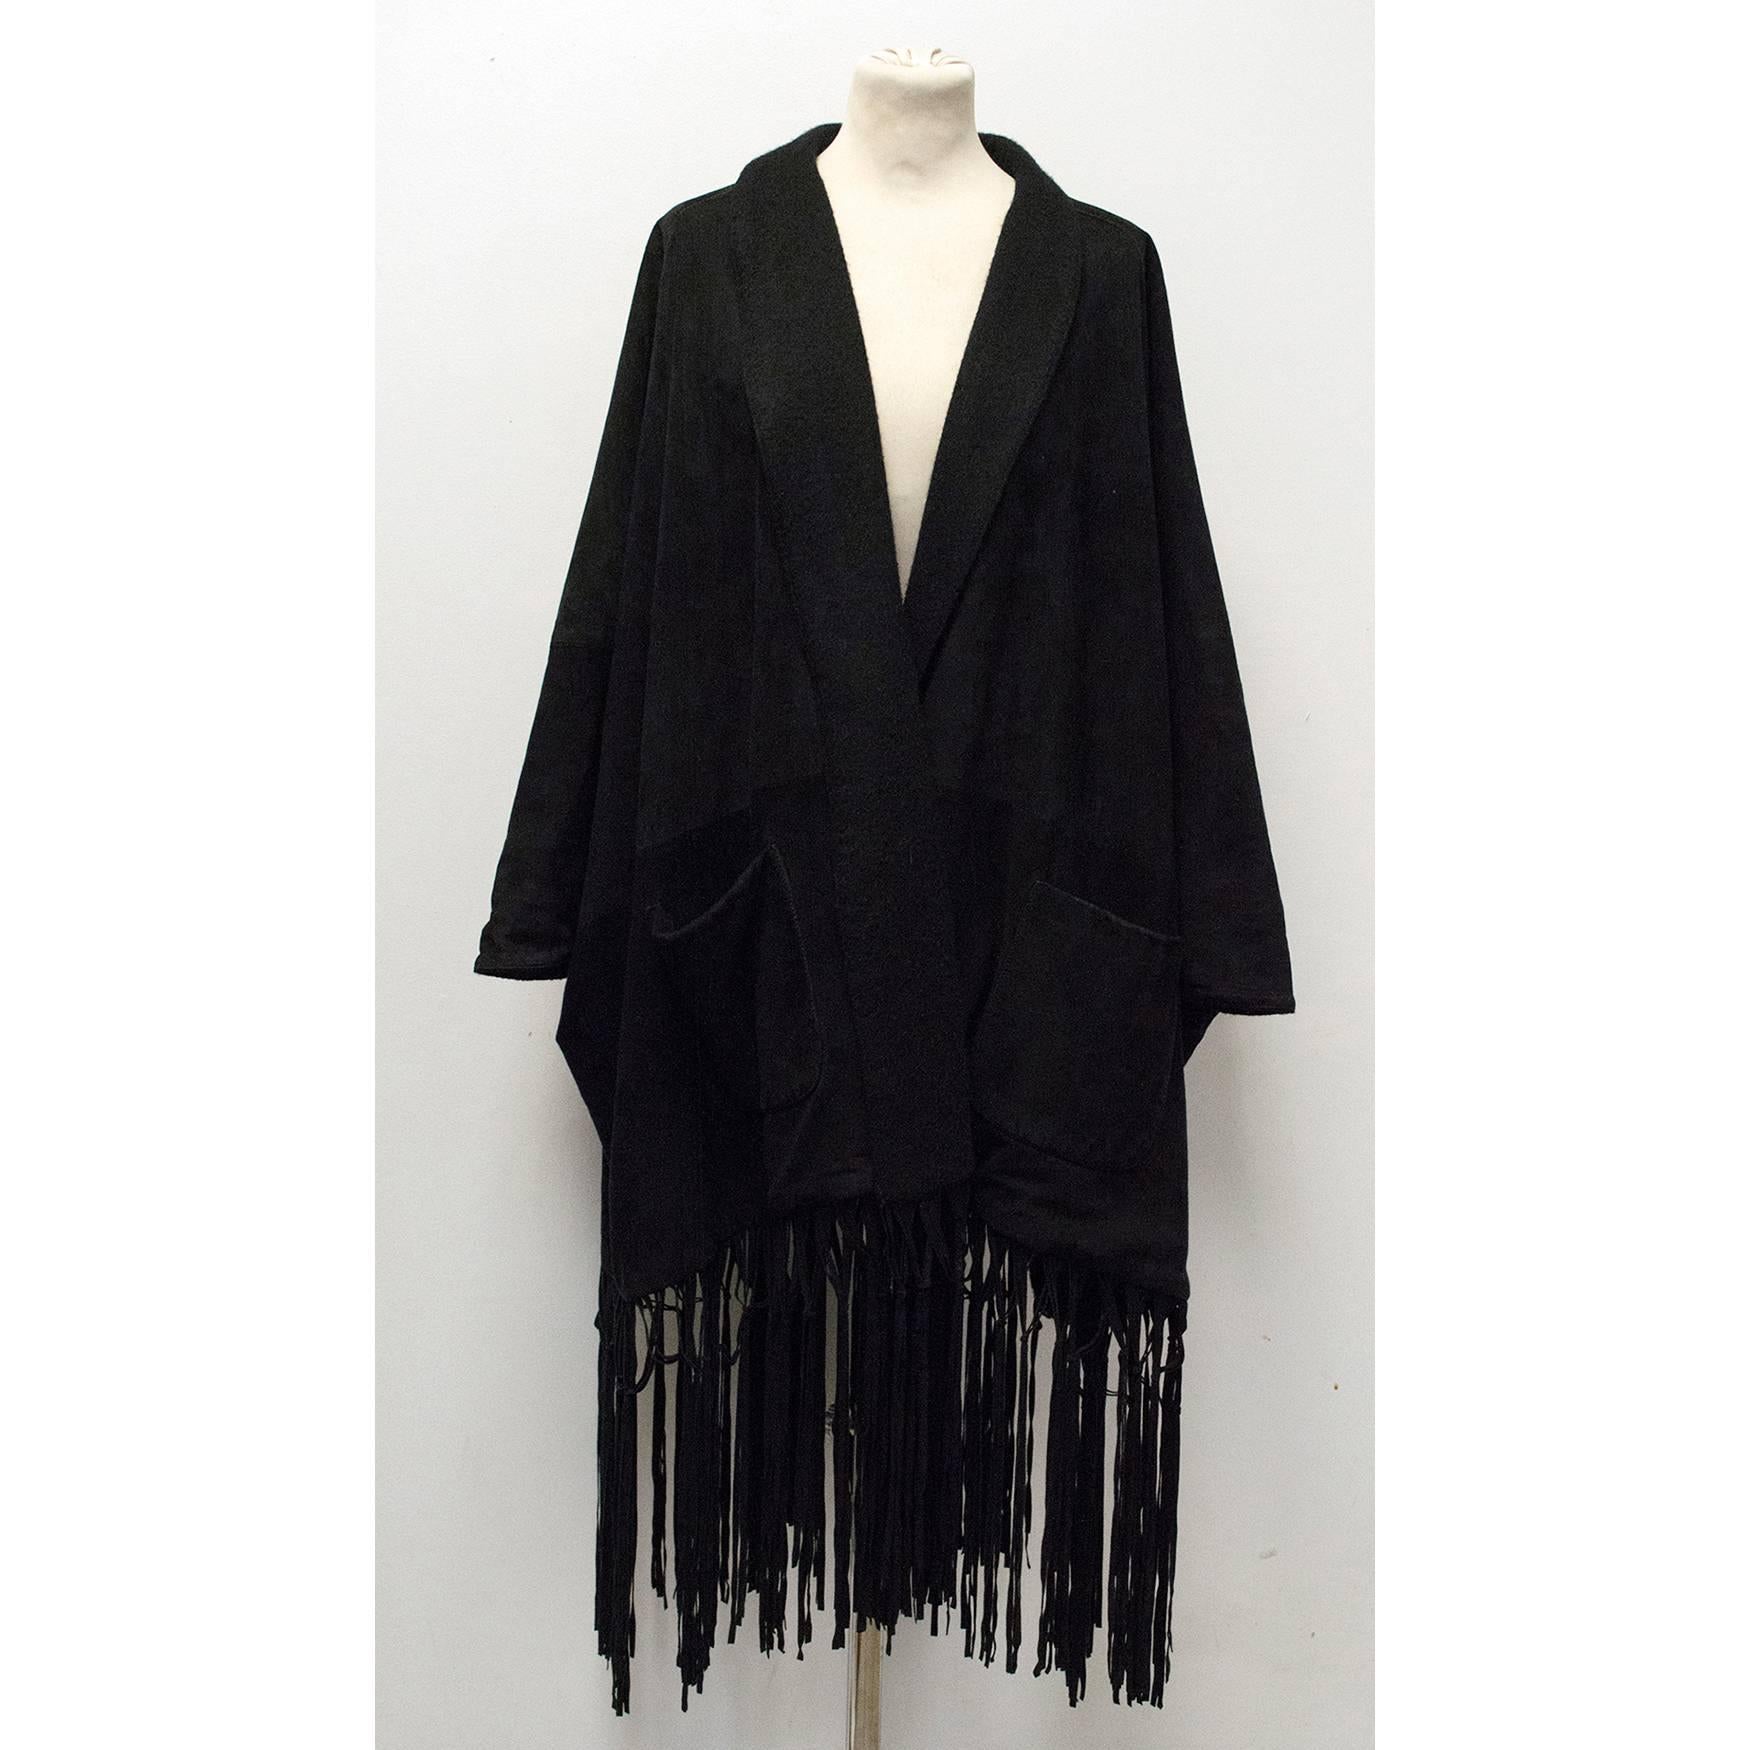 Loro Piana black suede coat with a cashmere shawl lapel, fringed hem and a cashmere lining. The coat is very soft to the touch and medium weight with a relaxed oversize fit and two large pockets on the front. Made in Italy. 

100% Suede with a